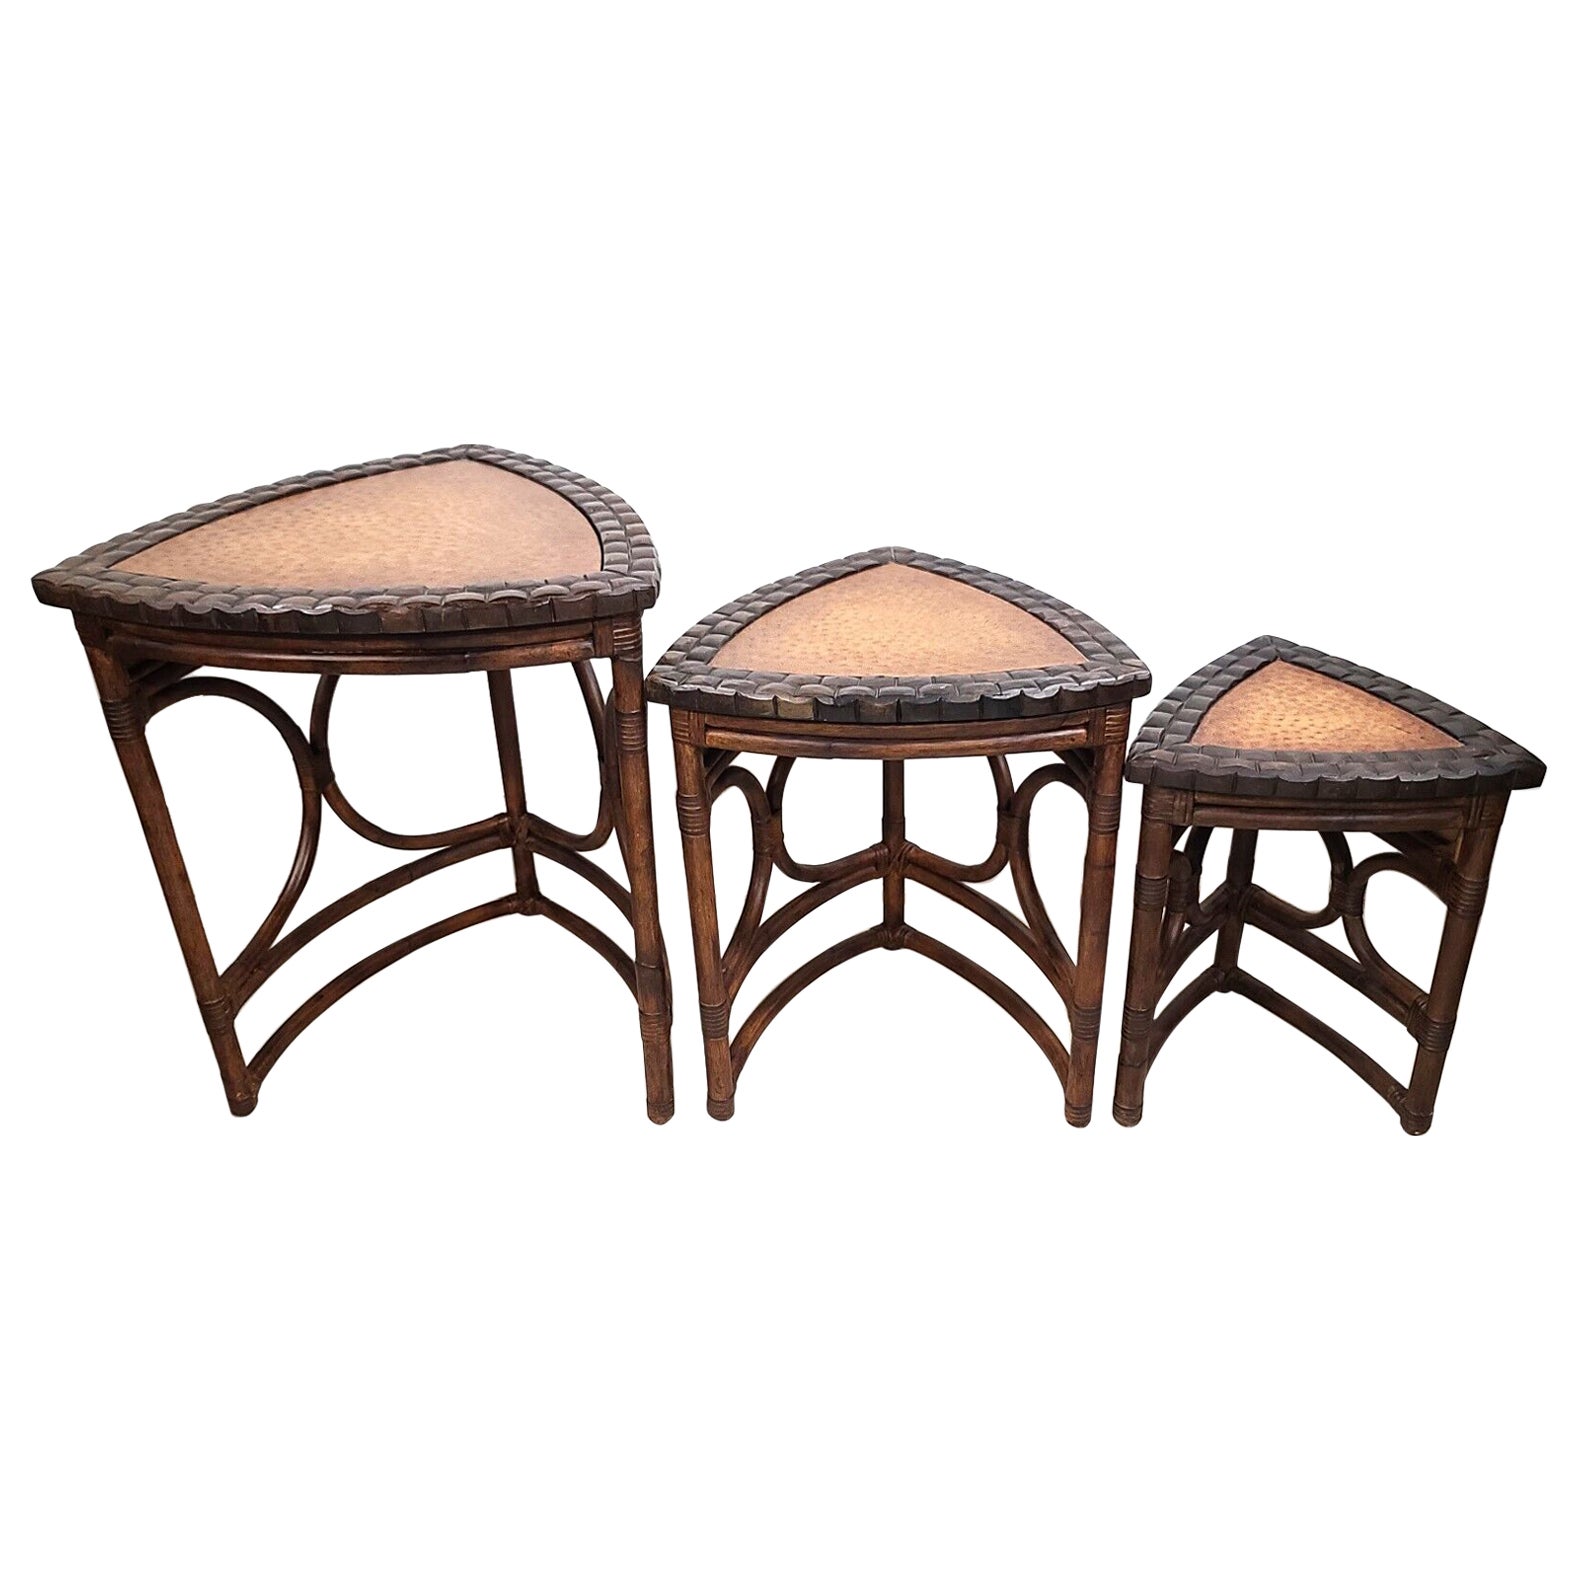 Vintage Bamboo Rattan Coconut Shell Ostrich Nesting Tables, Set of 3